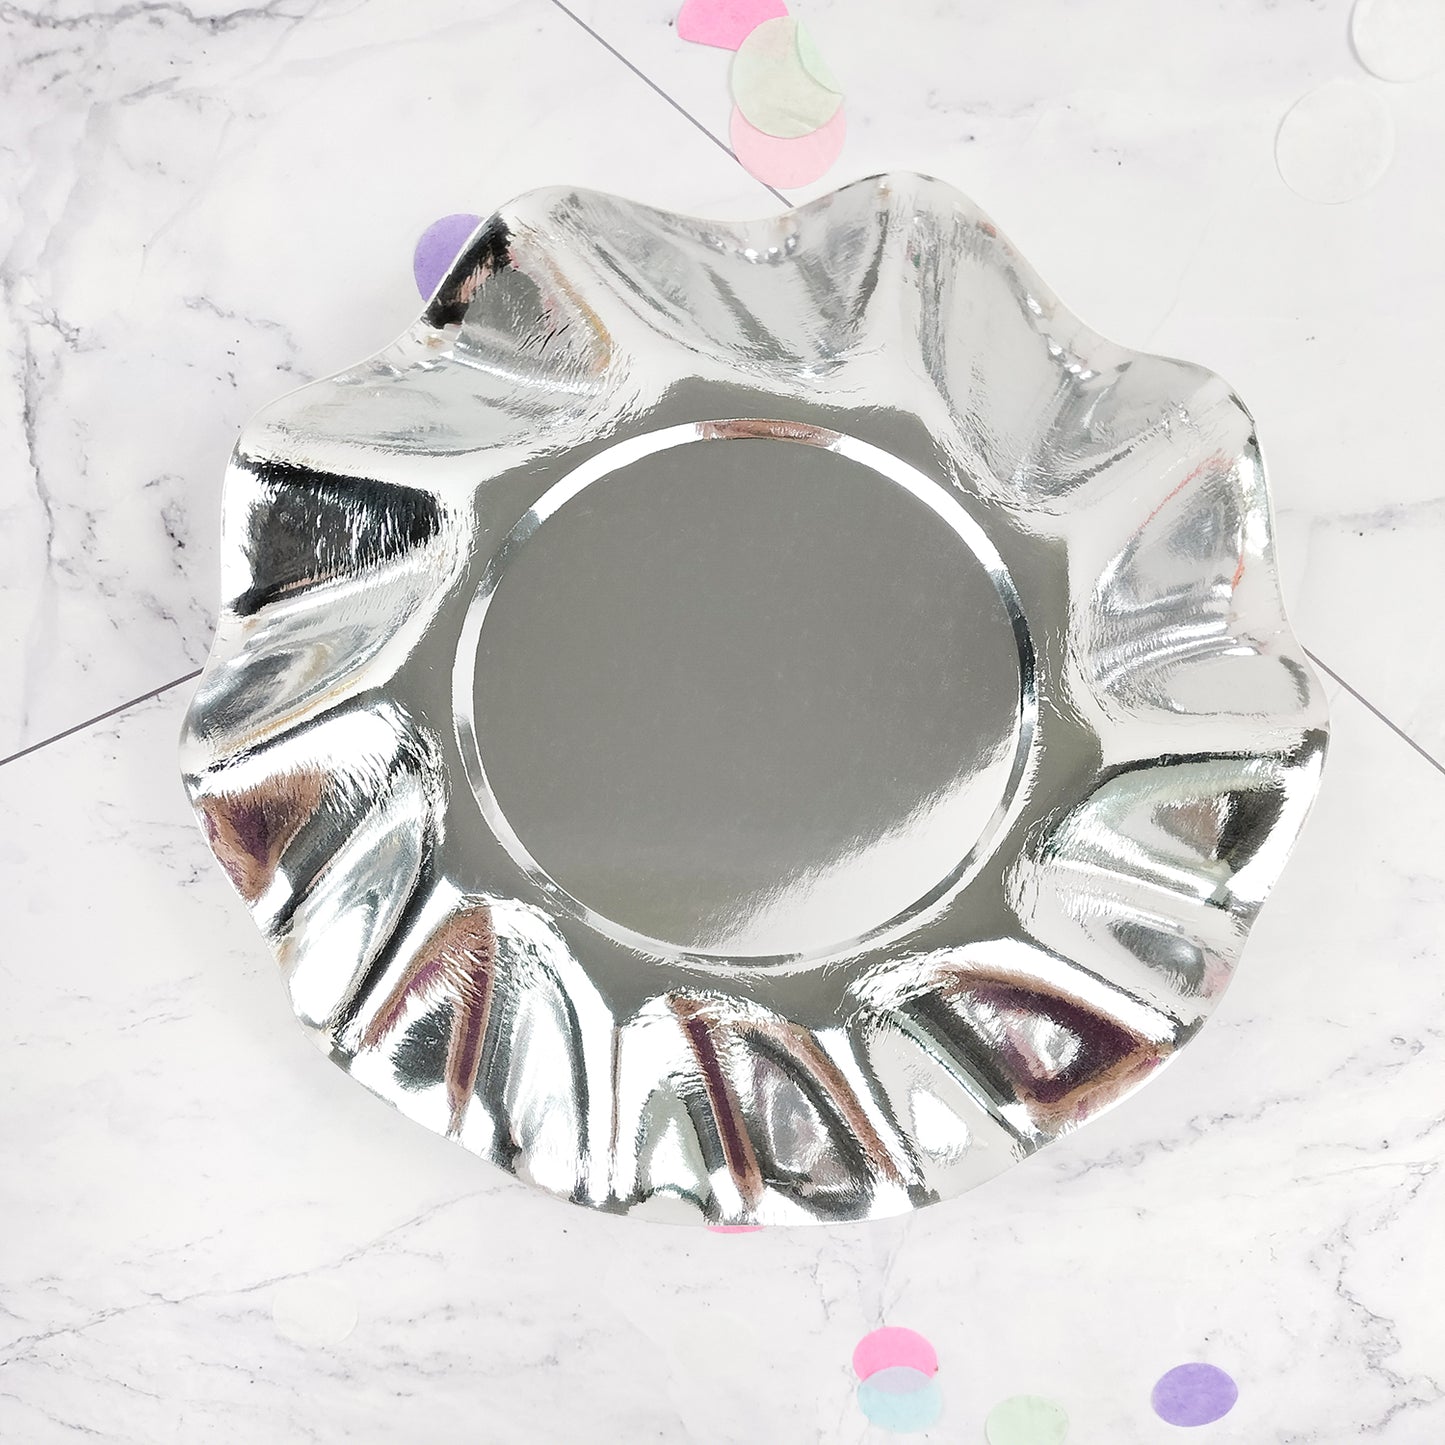 New Lobed Wheel Metallic Silver Paper plate Dessert Plate for Birthday Party Valentine's Day Weddings